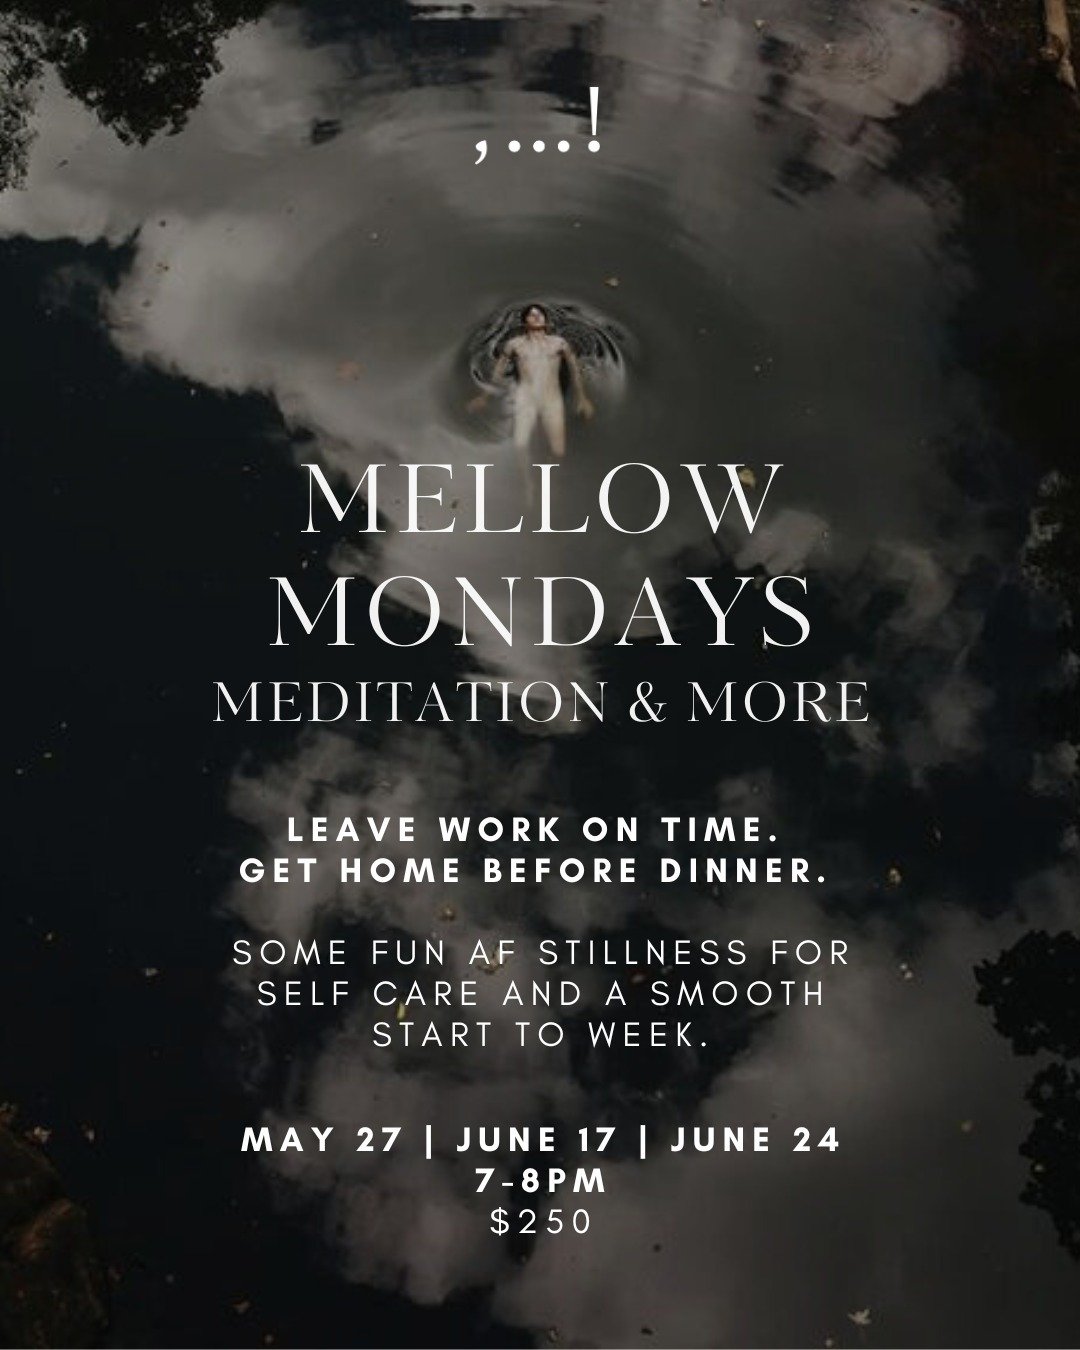 Mellow Mondays is the best way to kickstart your week right: to align your head and heart, get centred, unlock creativity and remember that life is joyful, even if Mondays sometimes feel sucky. 

We take a creative approach to wellness and meditation